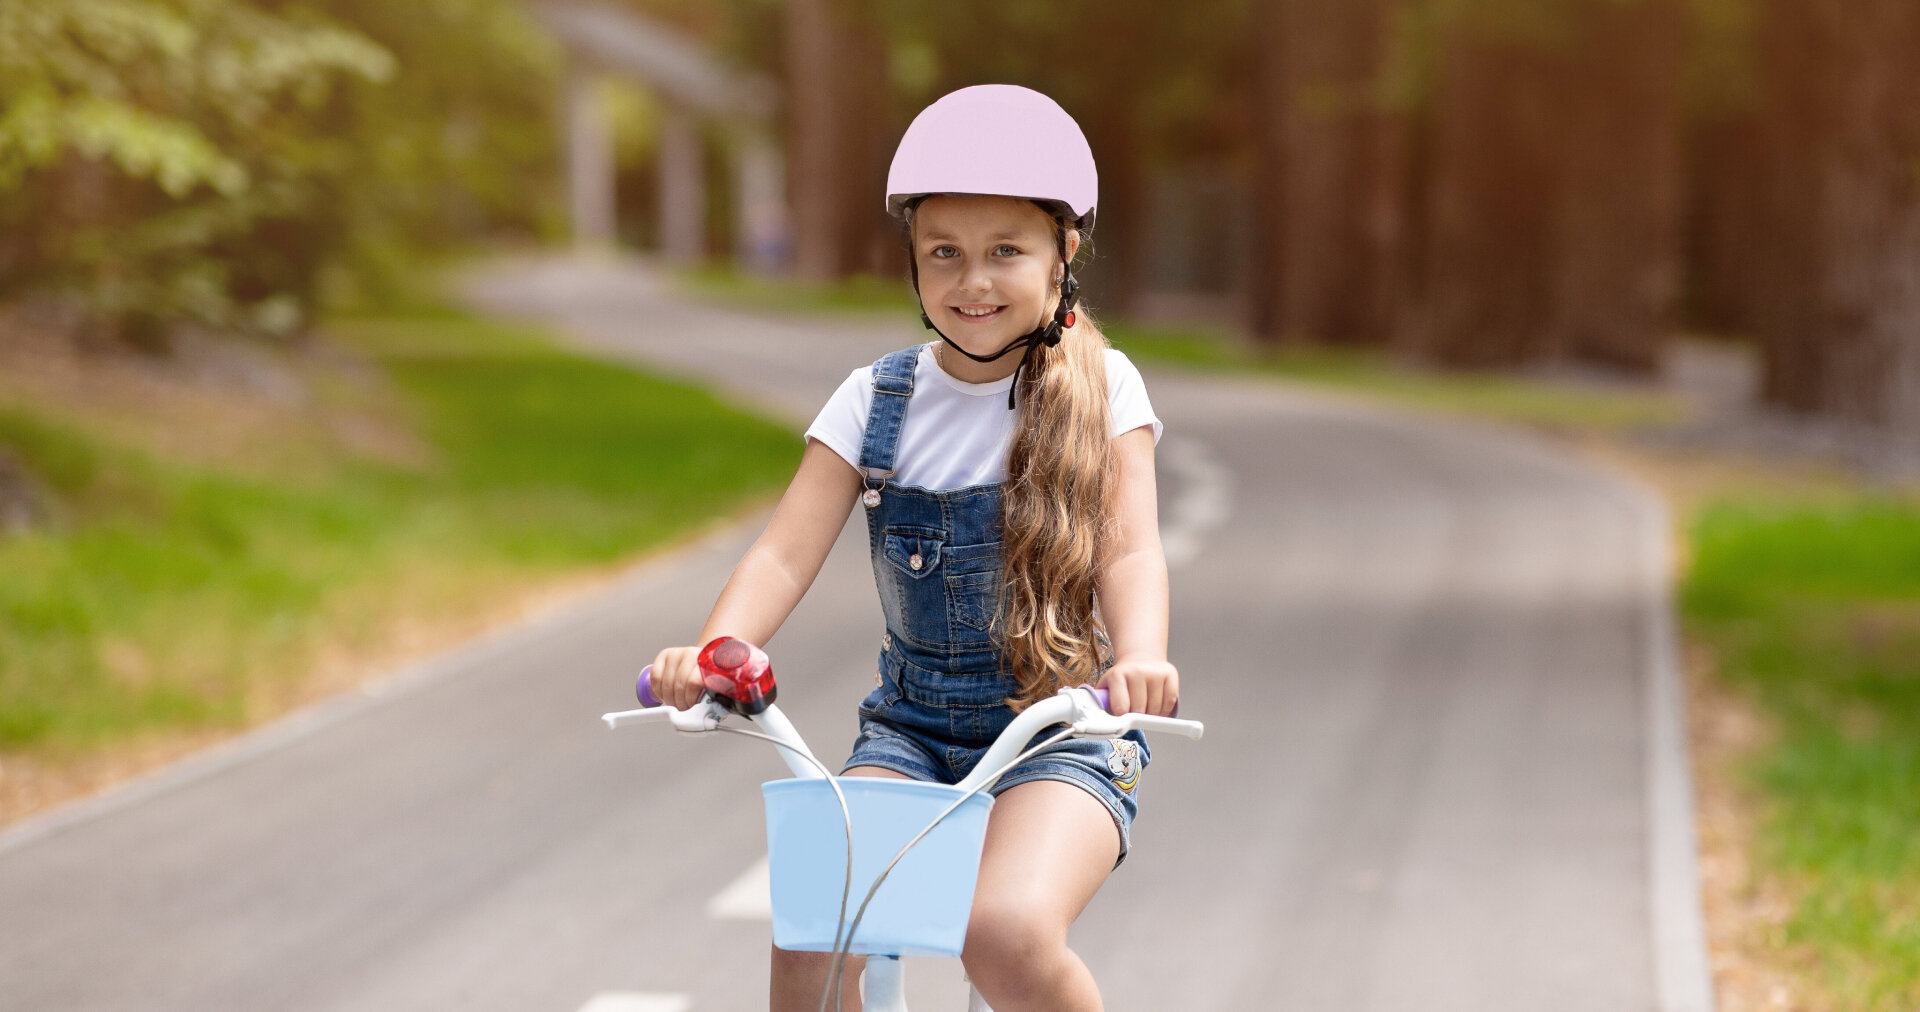 The young girl is smiling while riding her bicycle wearing pink helmet for safety purposes, (https://washington.wattelandyork.com/)